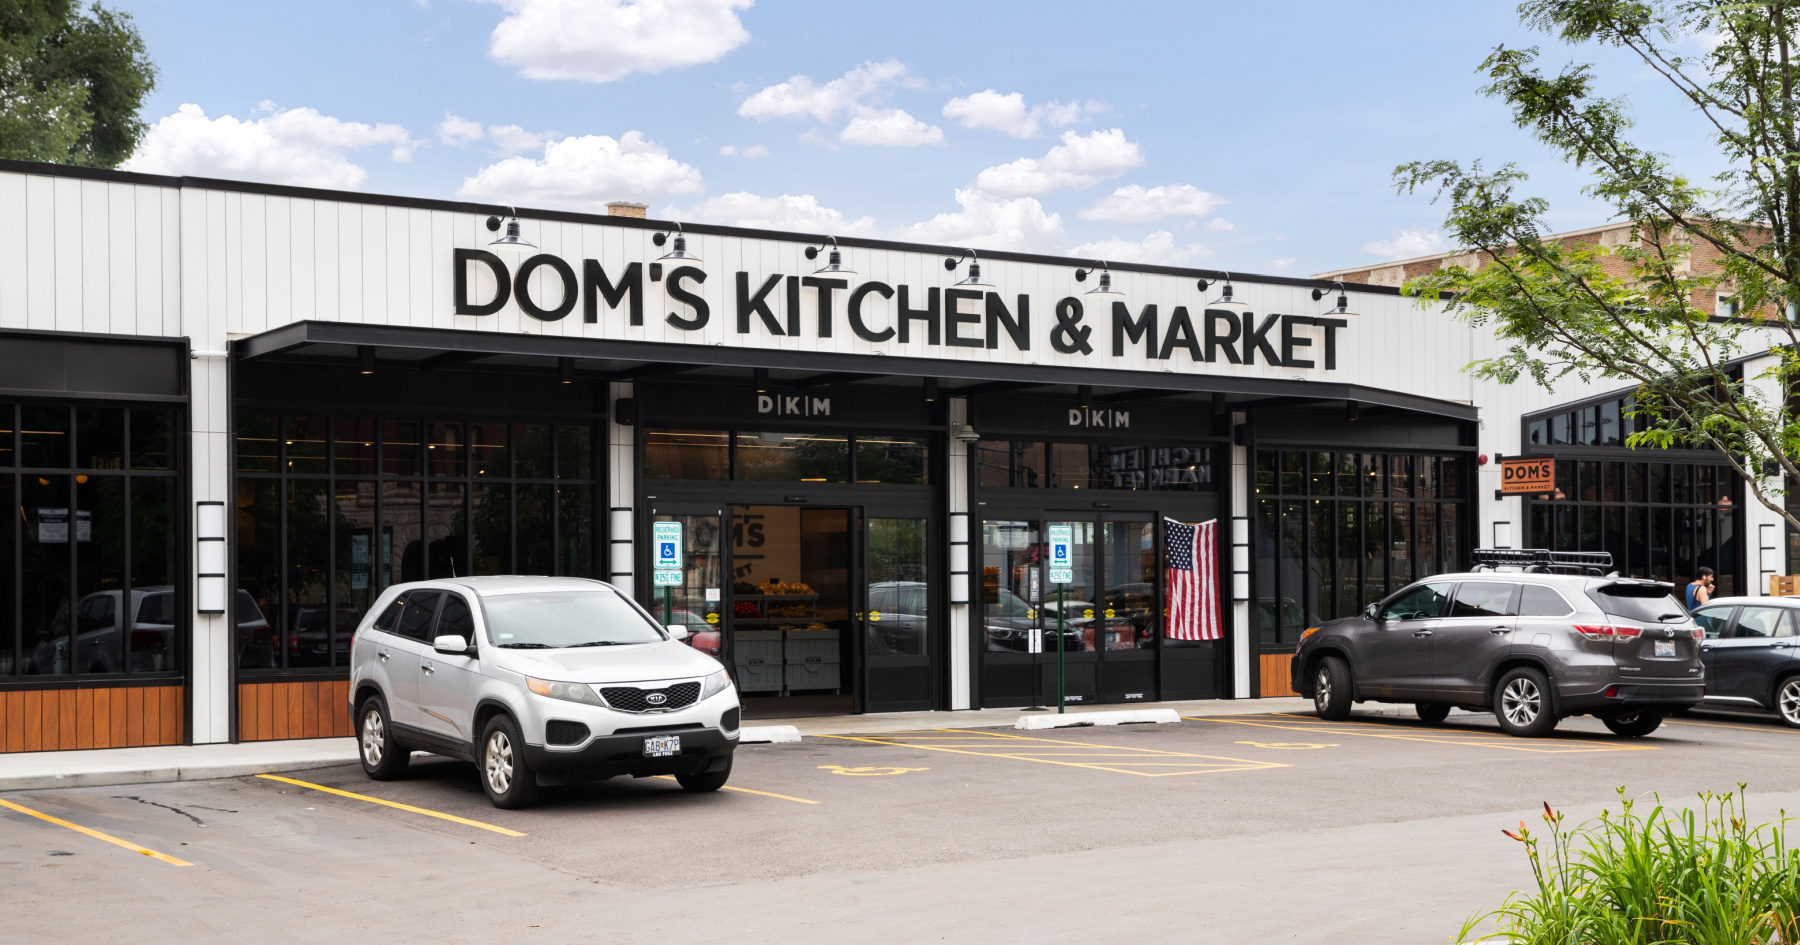 Nationwide Chain Foxtrot and Dom’s Kitchen & Market Shuts Down and Files for Bankruptcy